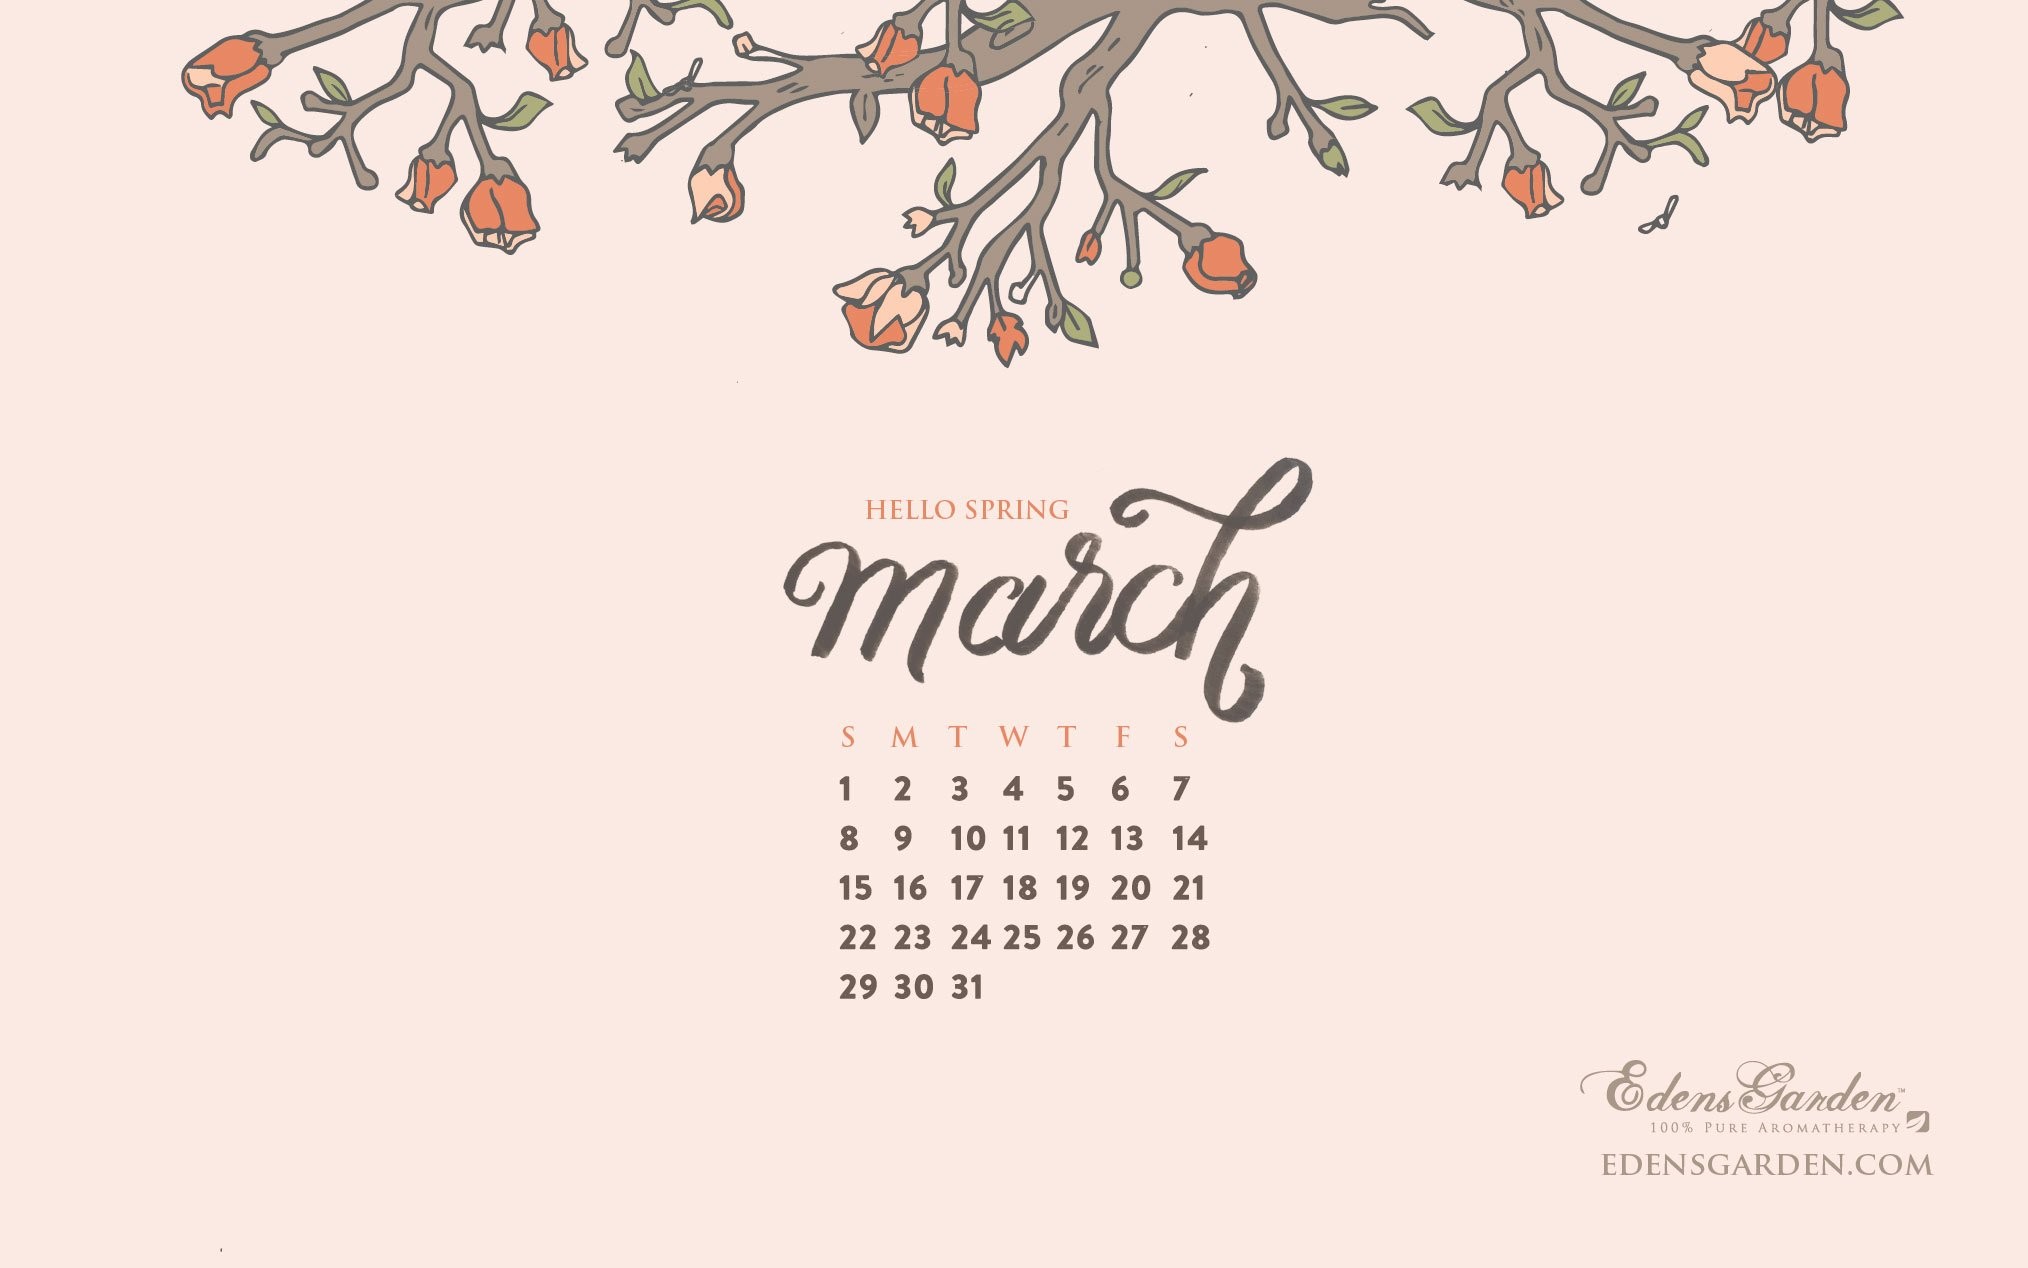 2028x1268 Celebrate the arrival of spring and stay on schedule with our free Edens  Garden desktop wallpaper calendar for March 2015. Just download the image  here and ...